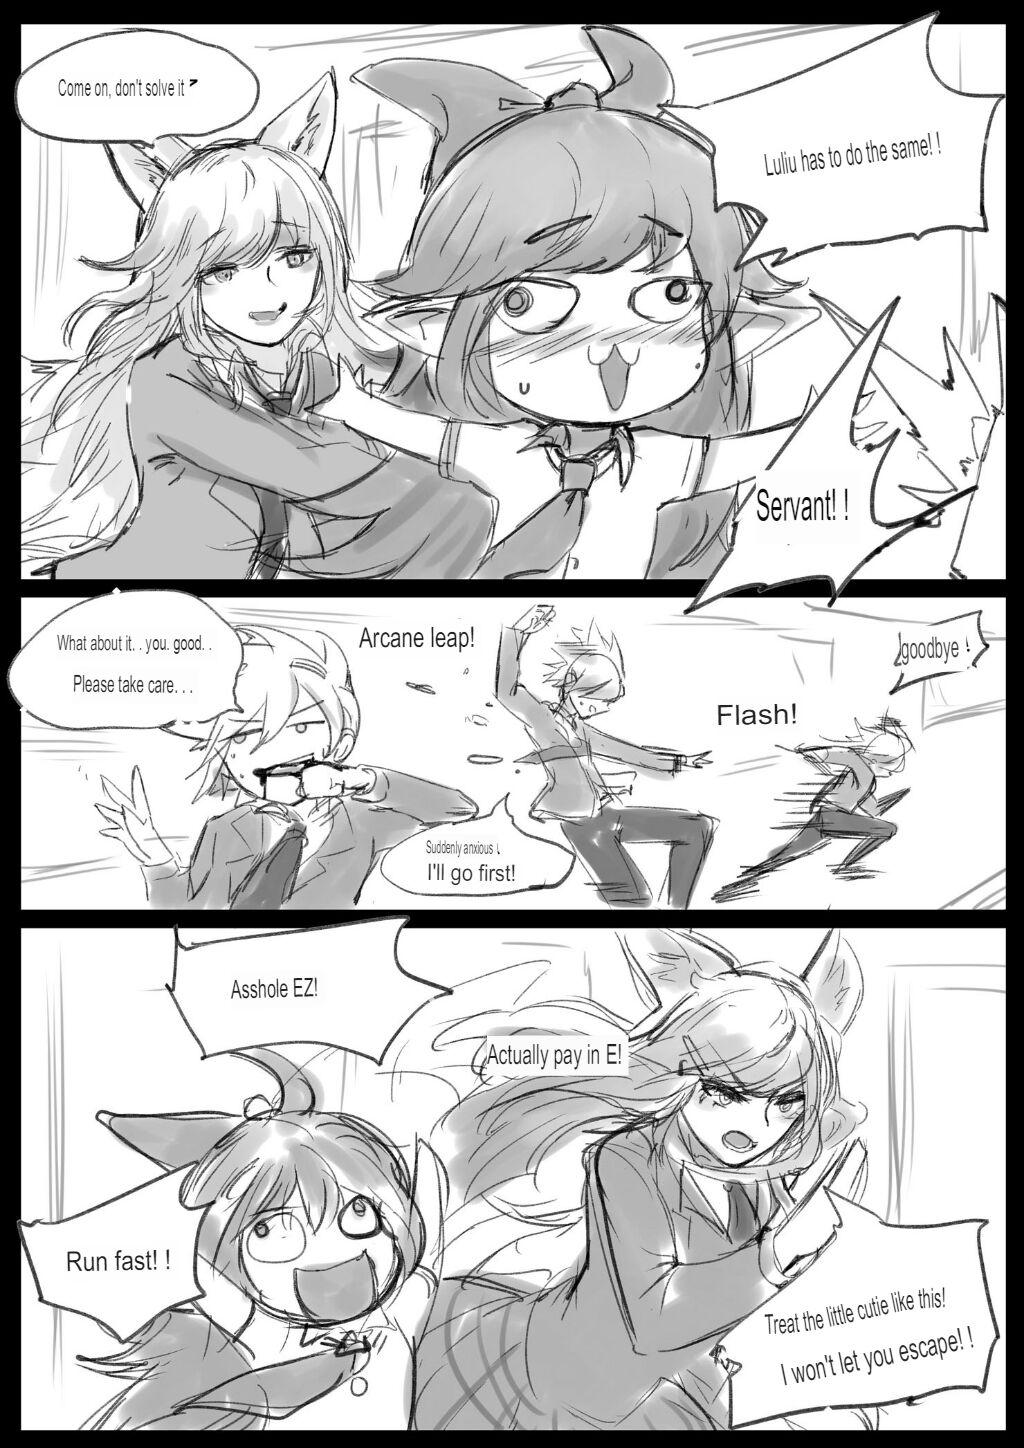 Office Fuck Sex Guardian 3 - League of legends Lolicon - Page 4